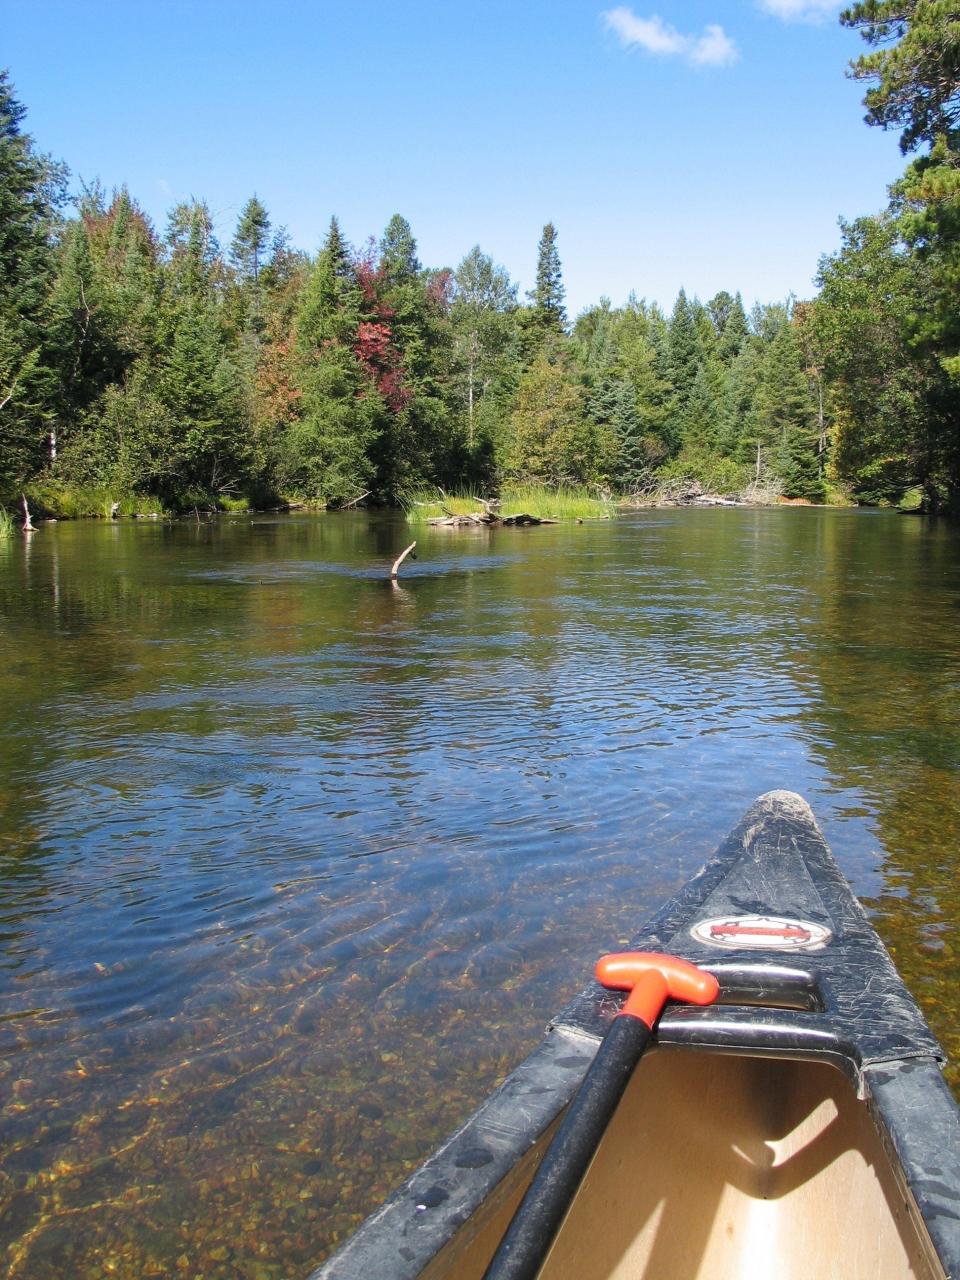 On the Au Sable River east of Grayling, your canoe may be the only one for miles on a Thursday in September.